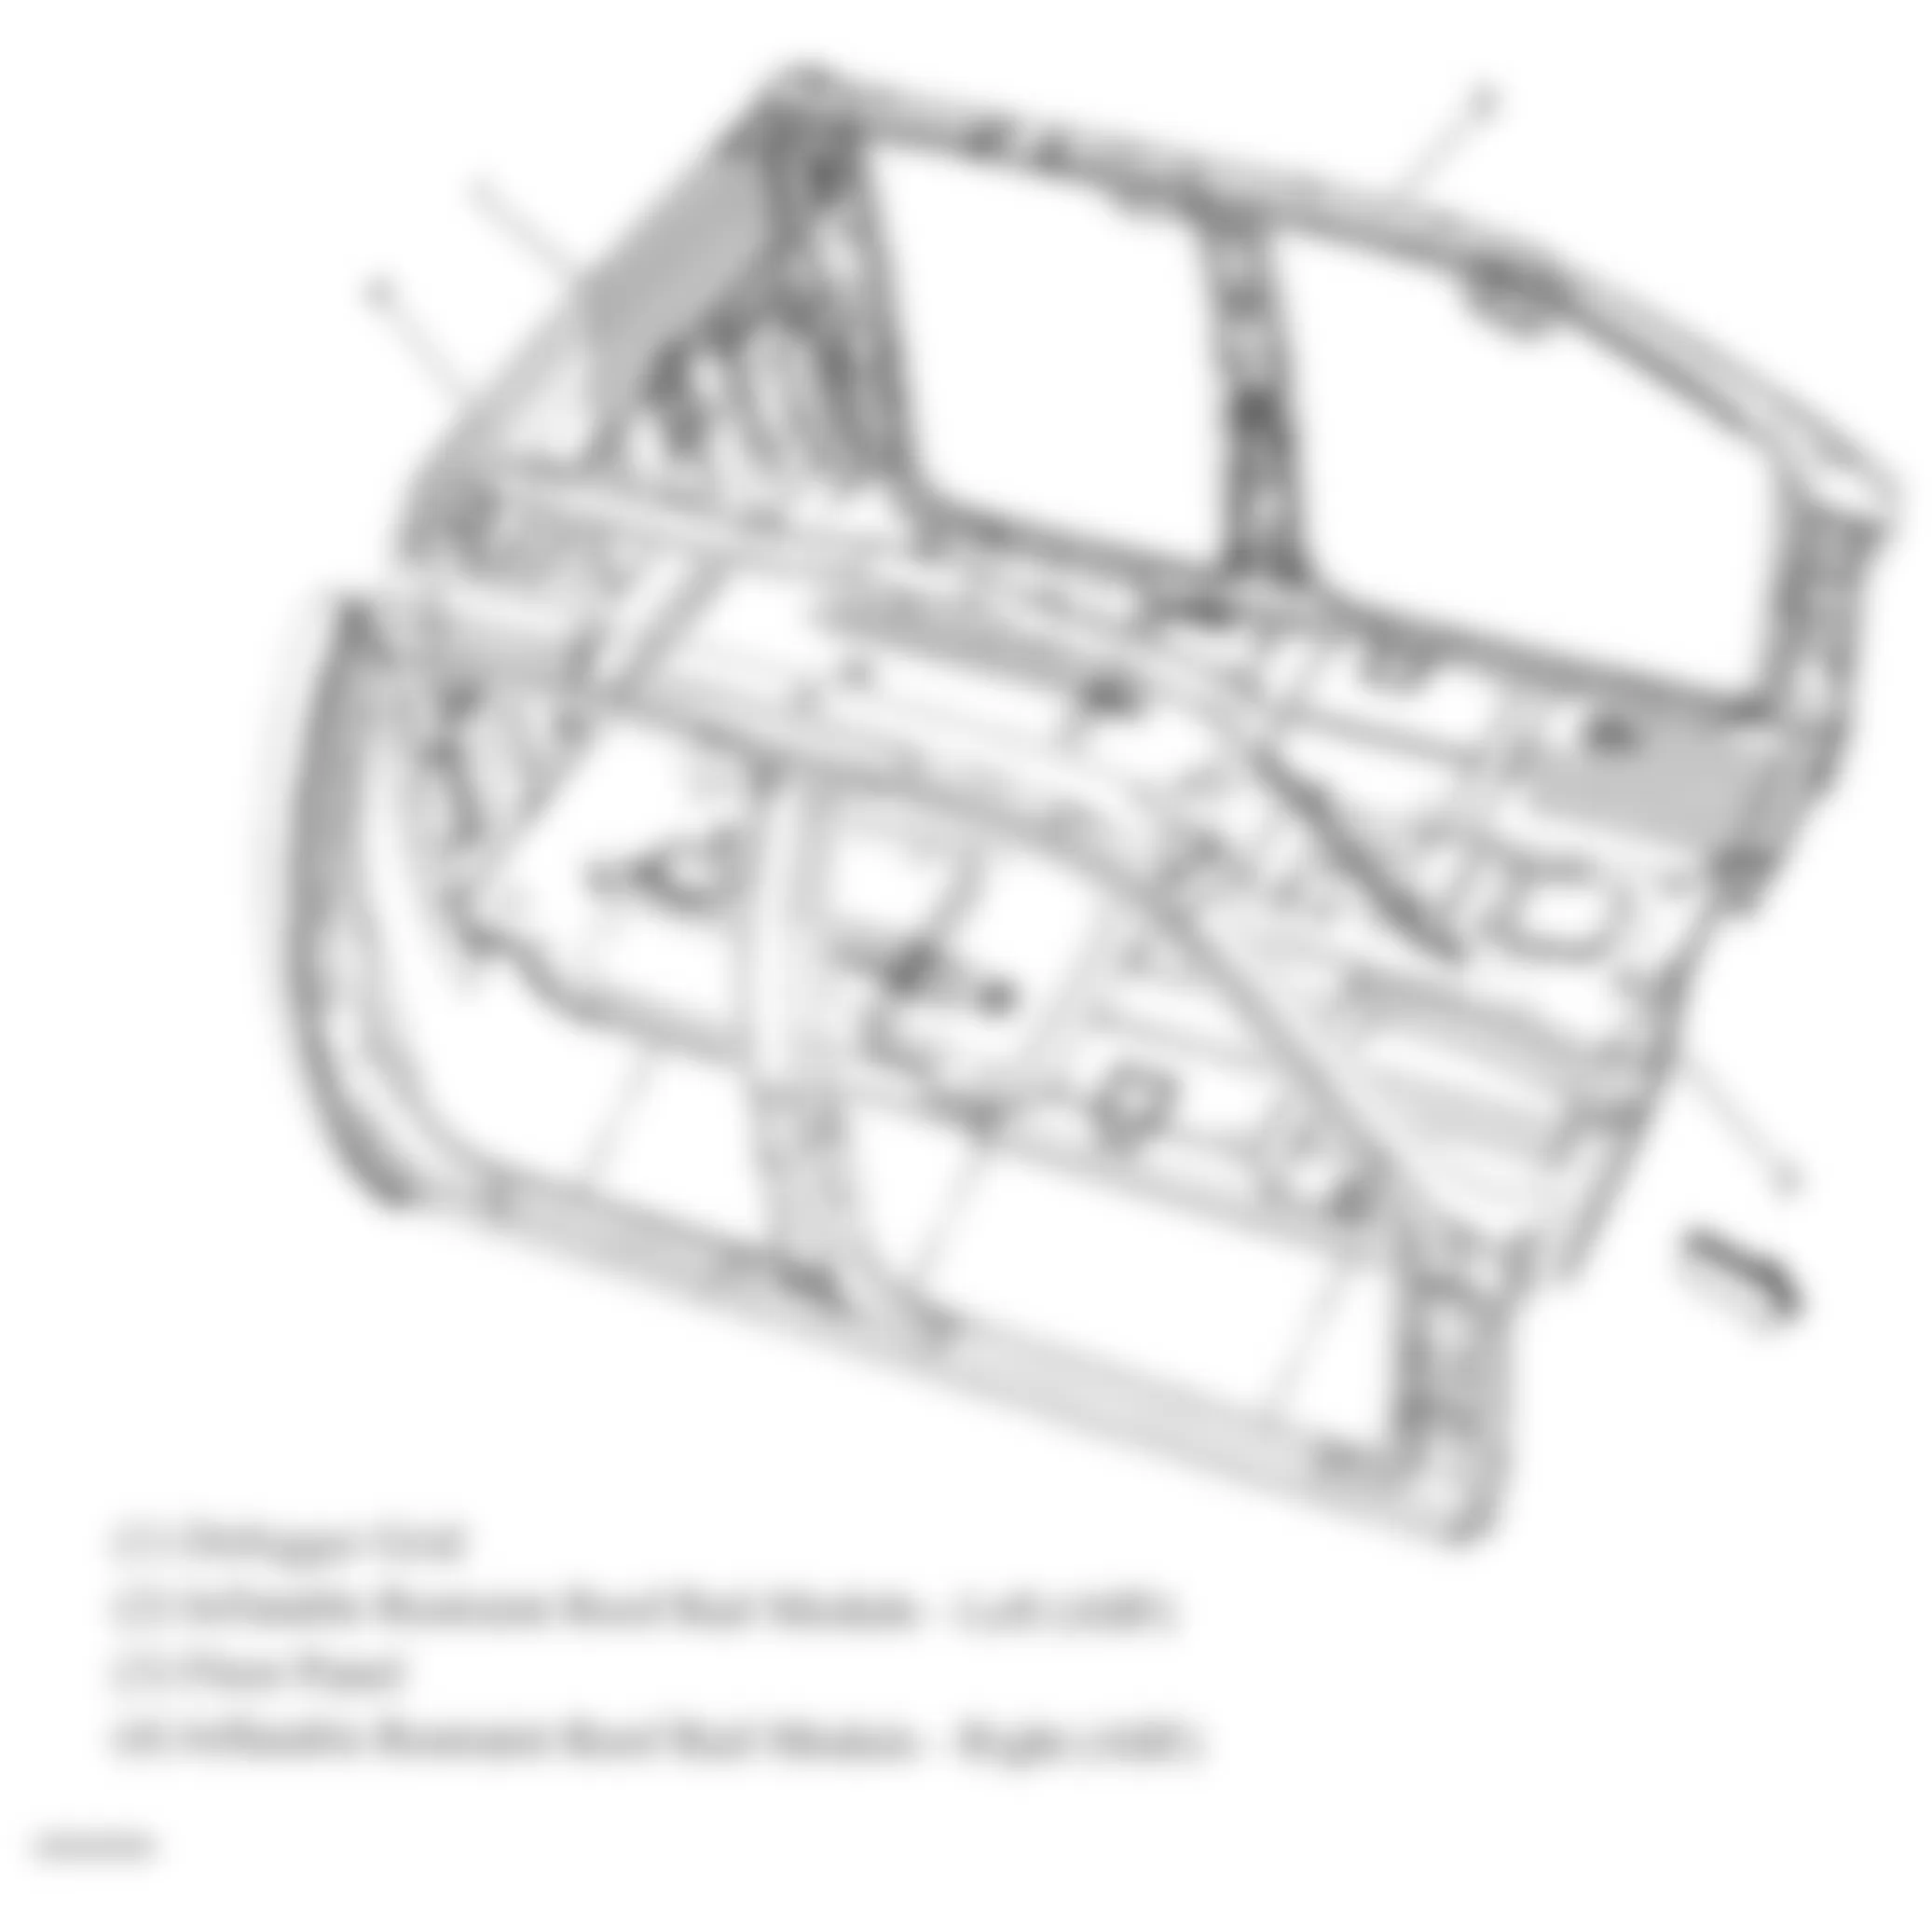 Chevrolet Silverado 1500 2007 - Component Locations -  Roof Rail Air Bags (Extended Cab & Crew Cab)